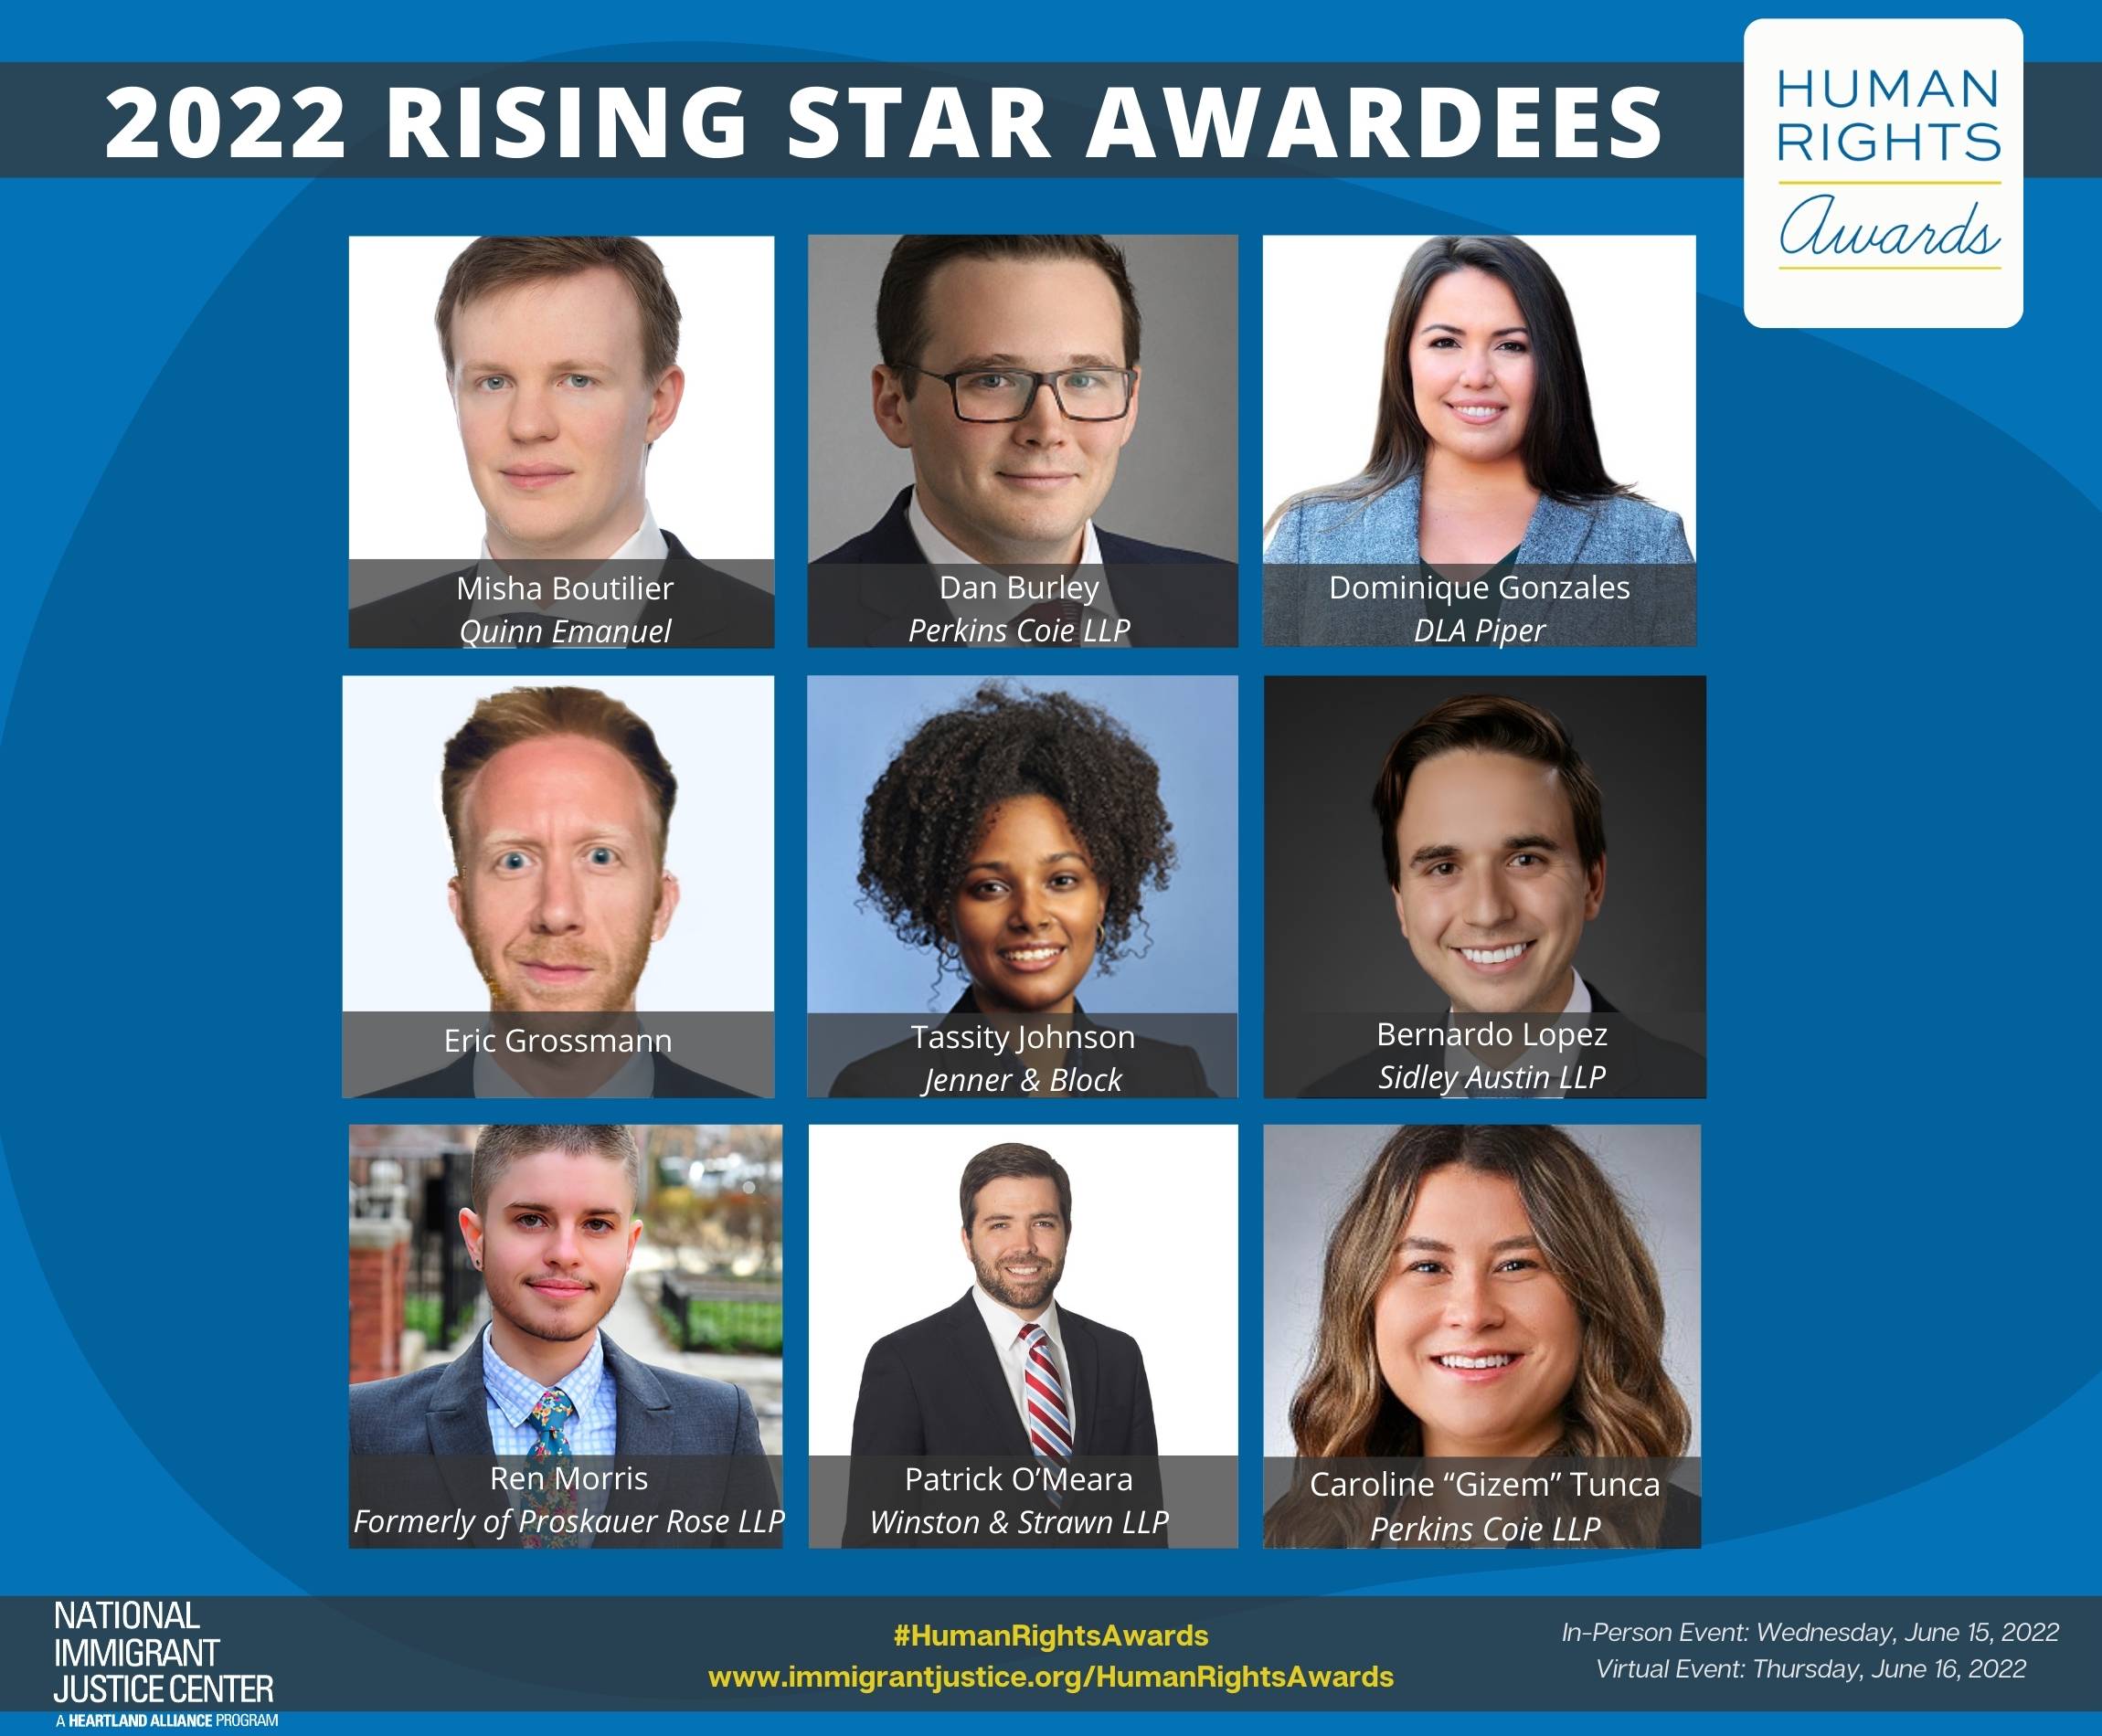 Headshots of the recipients of the 2022 Rising Star Awards